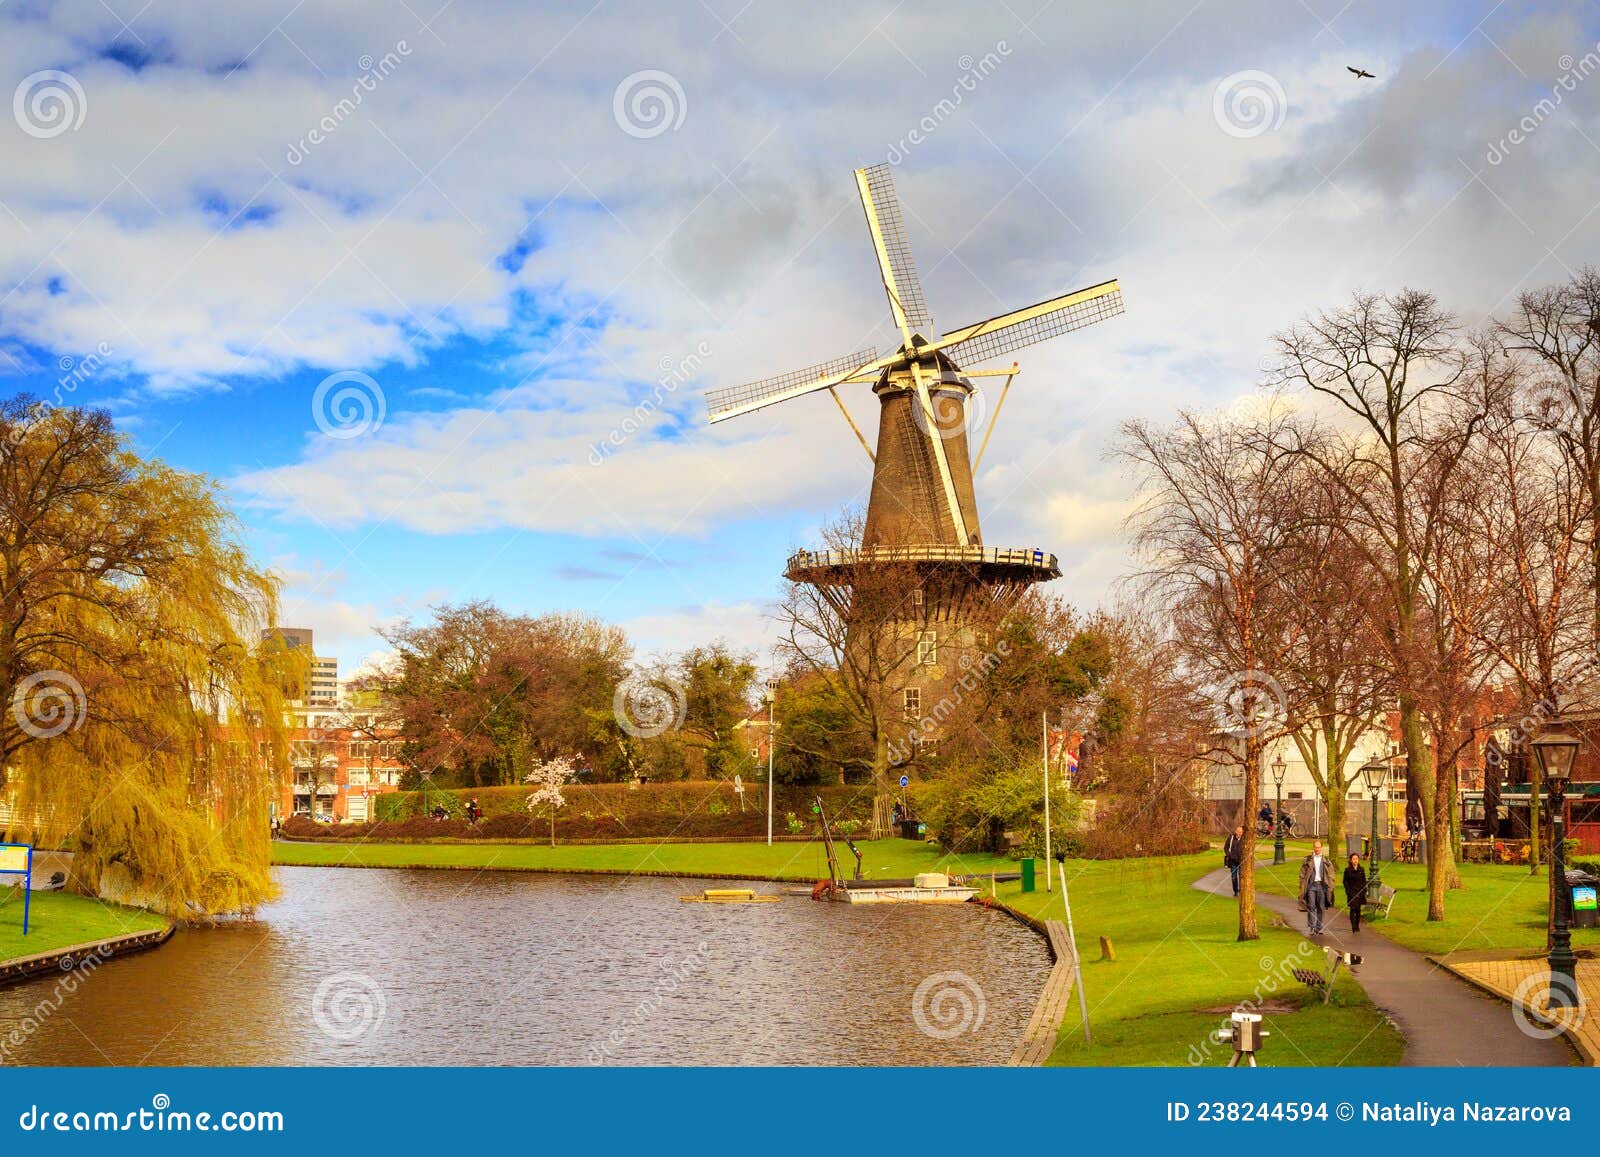 Windmill De Valk In Leiden The Netherlands Editorial Stock Image Image Of Historical 